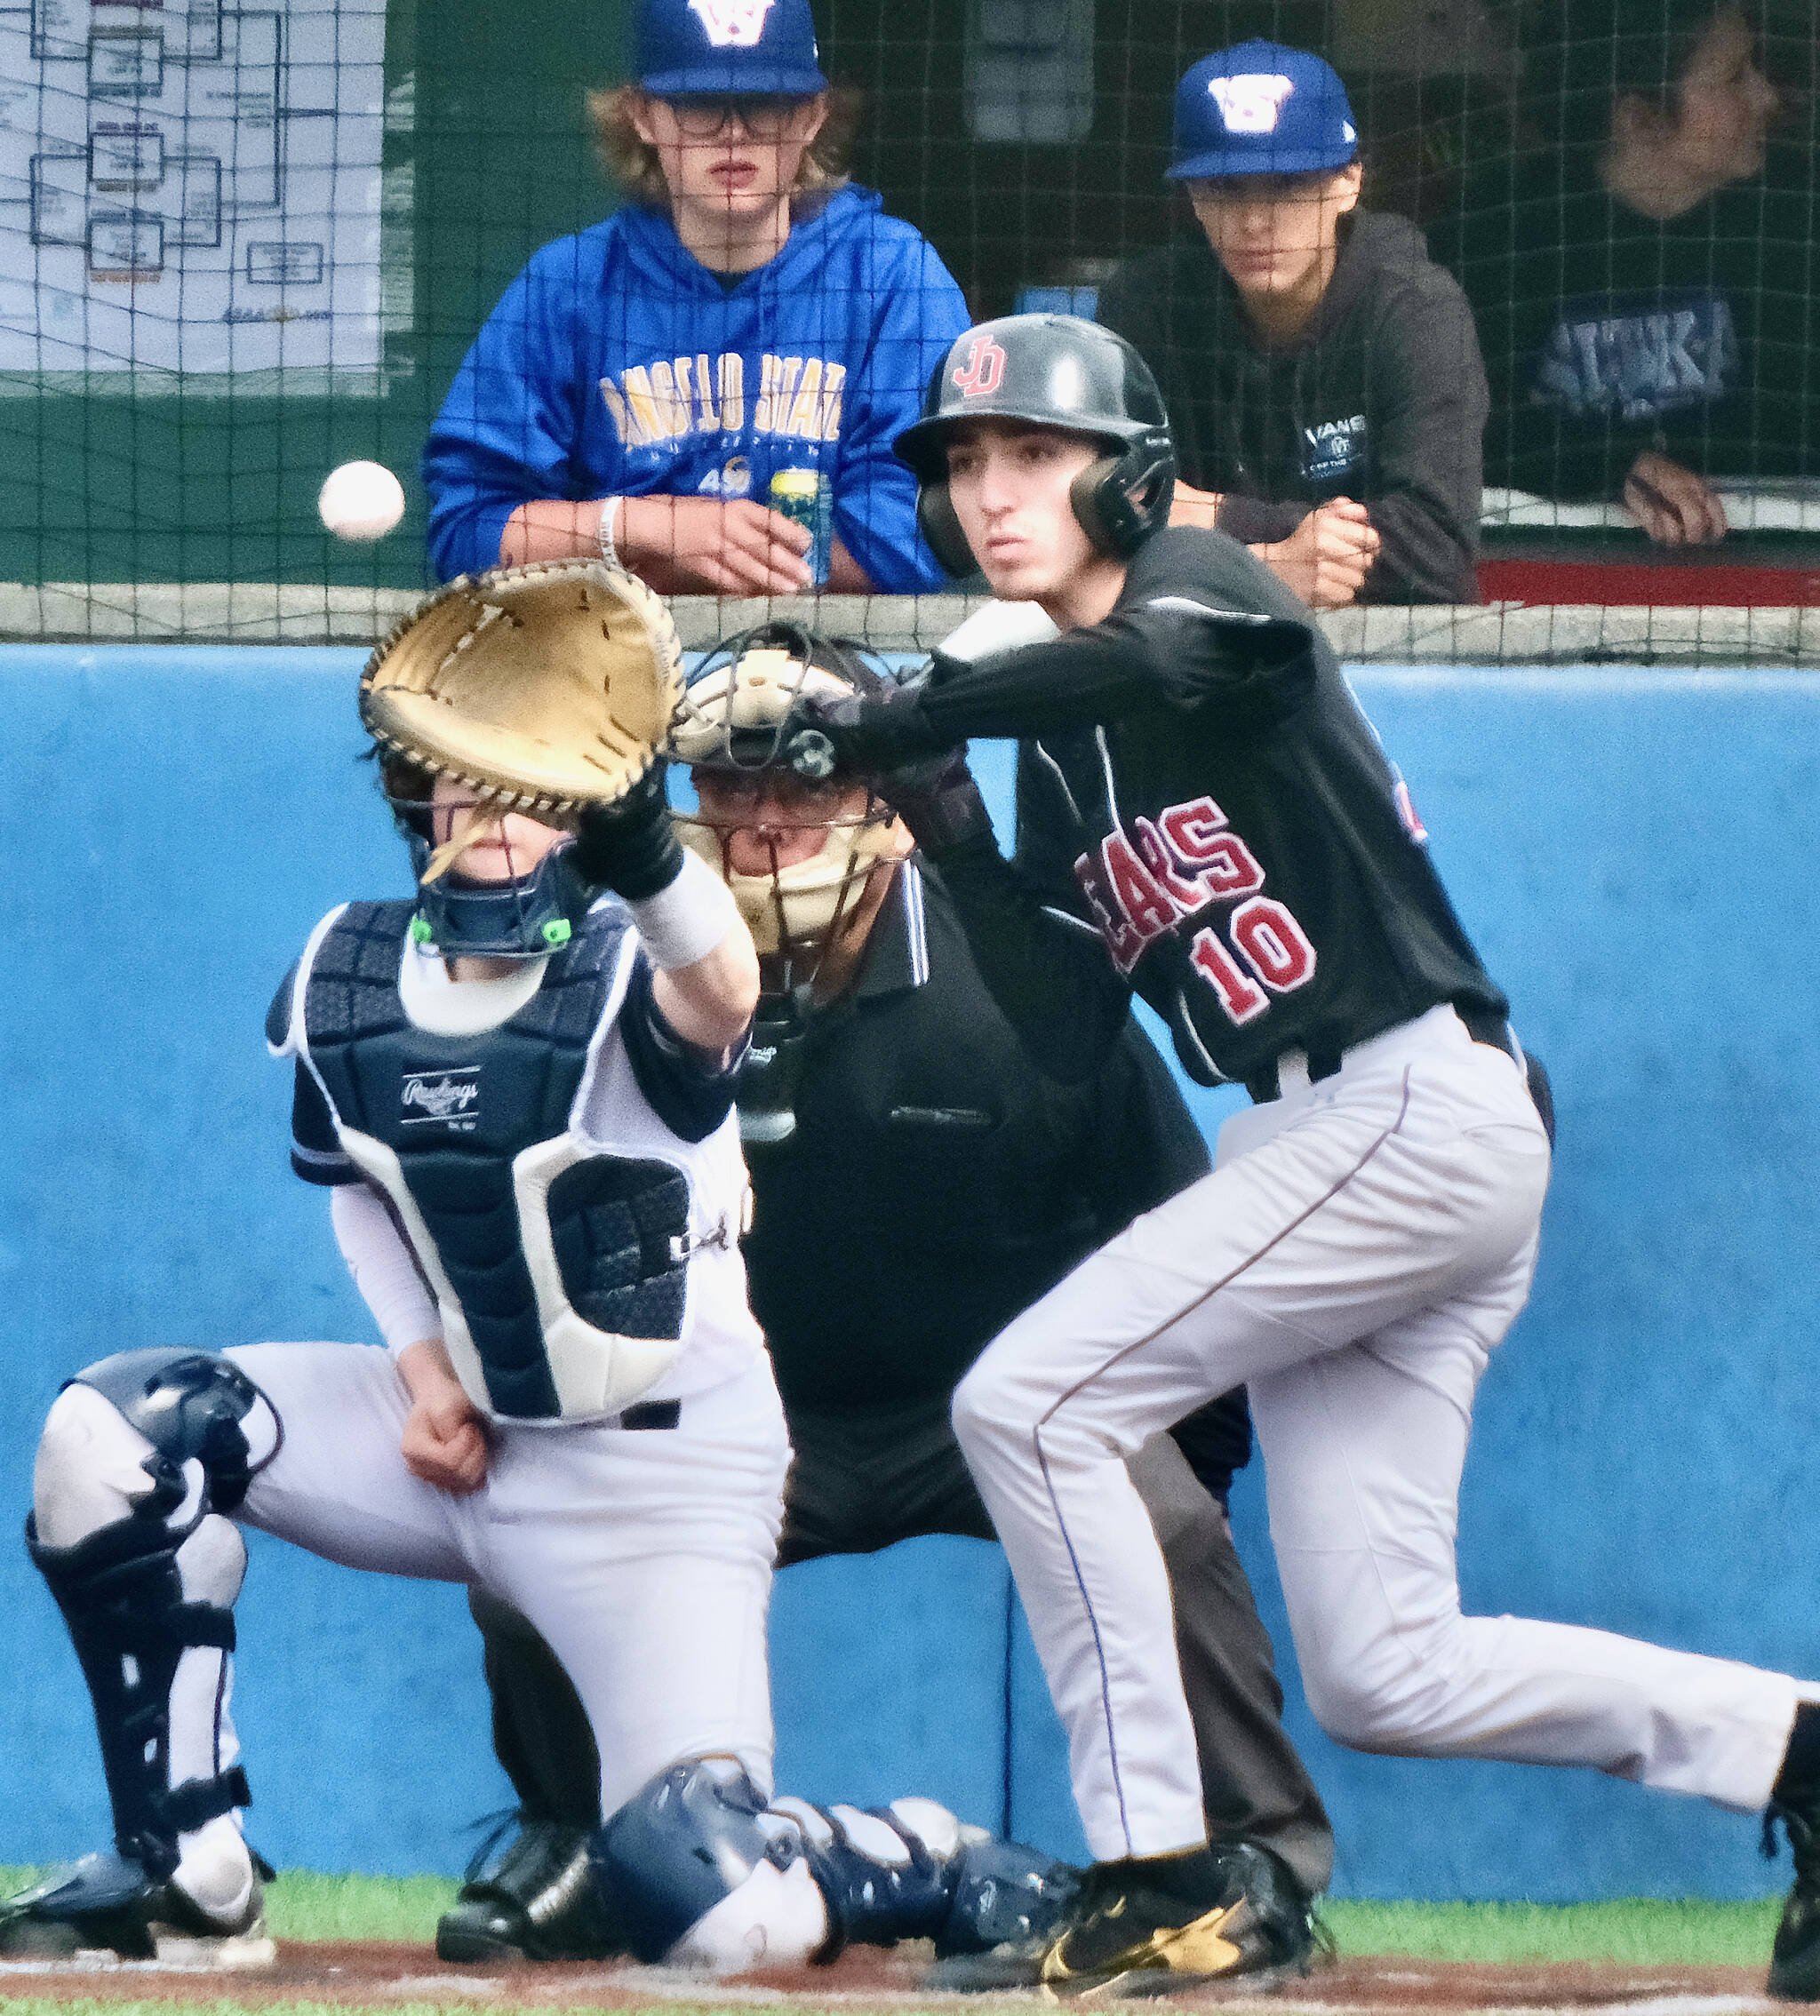 Home plate umpire Lawrence “Woody” Widmark watches a pitch to JDHS senior batter Joe Aline during the Alaska School Activities Association State Baseball Championships in Sitka last week. Widmark was honored with the ASAA Gold Lifetime Pass at the tournament. (Klas Stolpe / Juneau Empire)